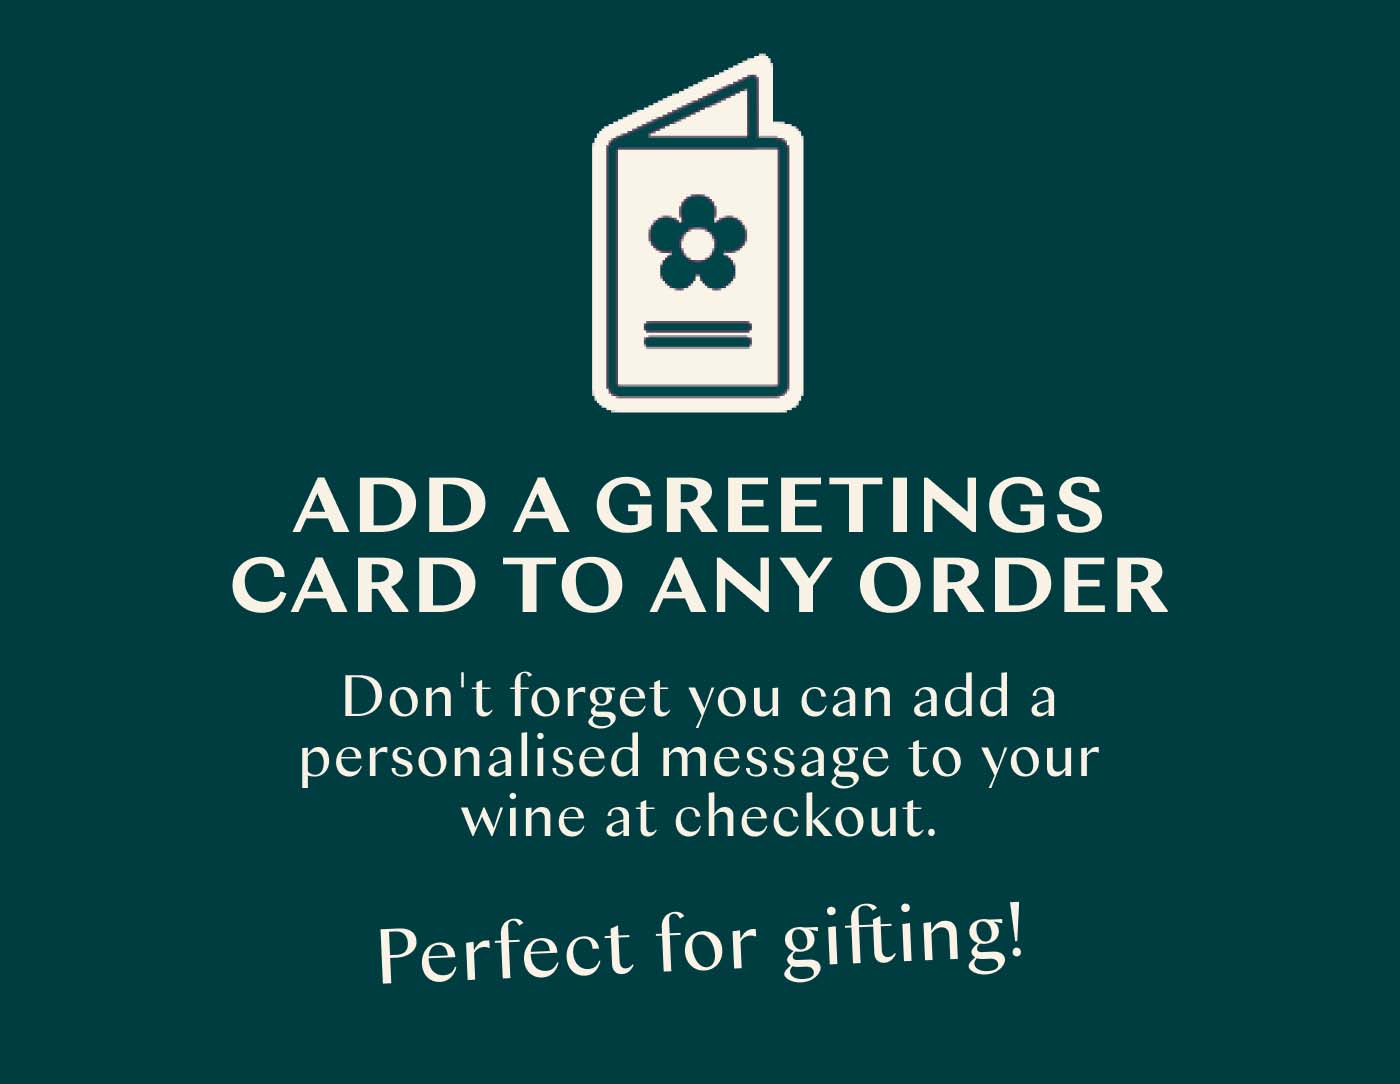 Add a greeting card to any order - perfect for gifting